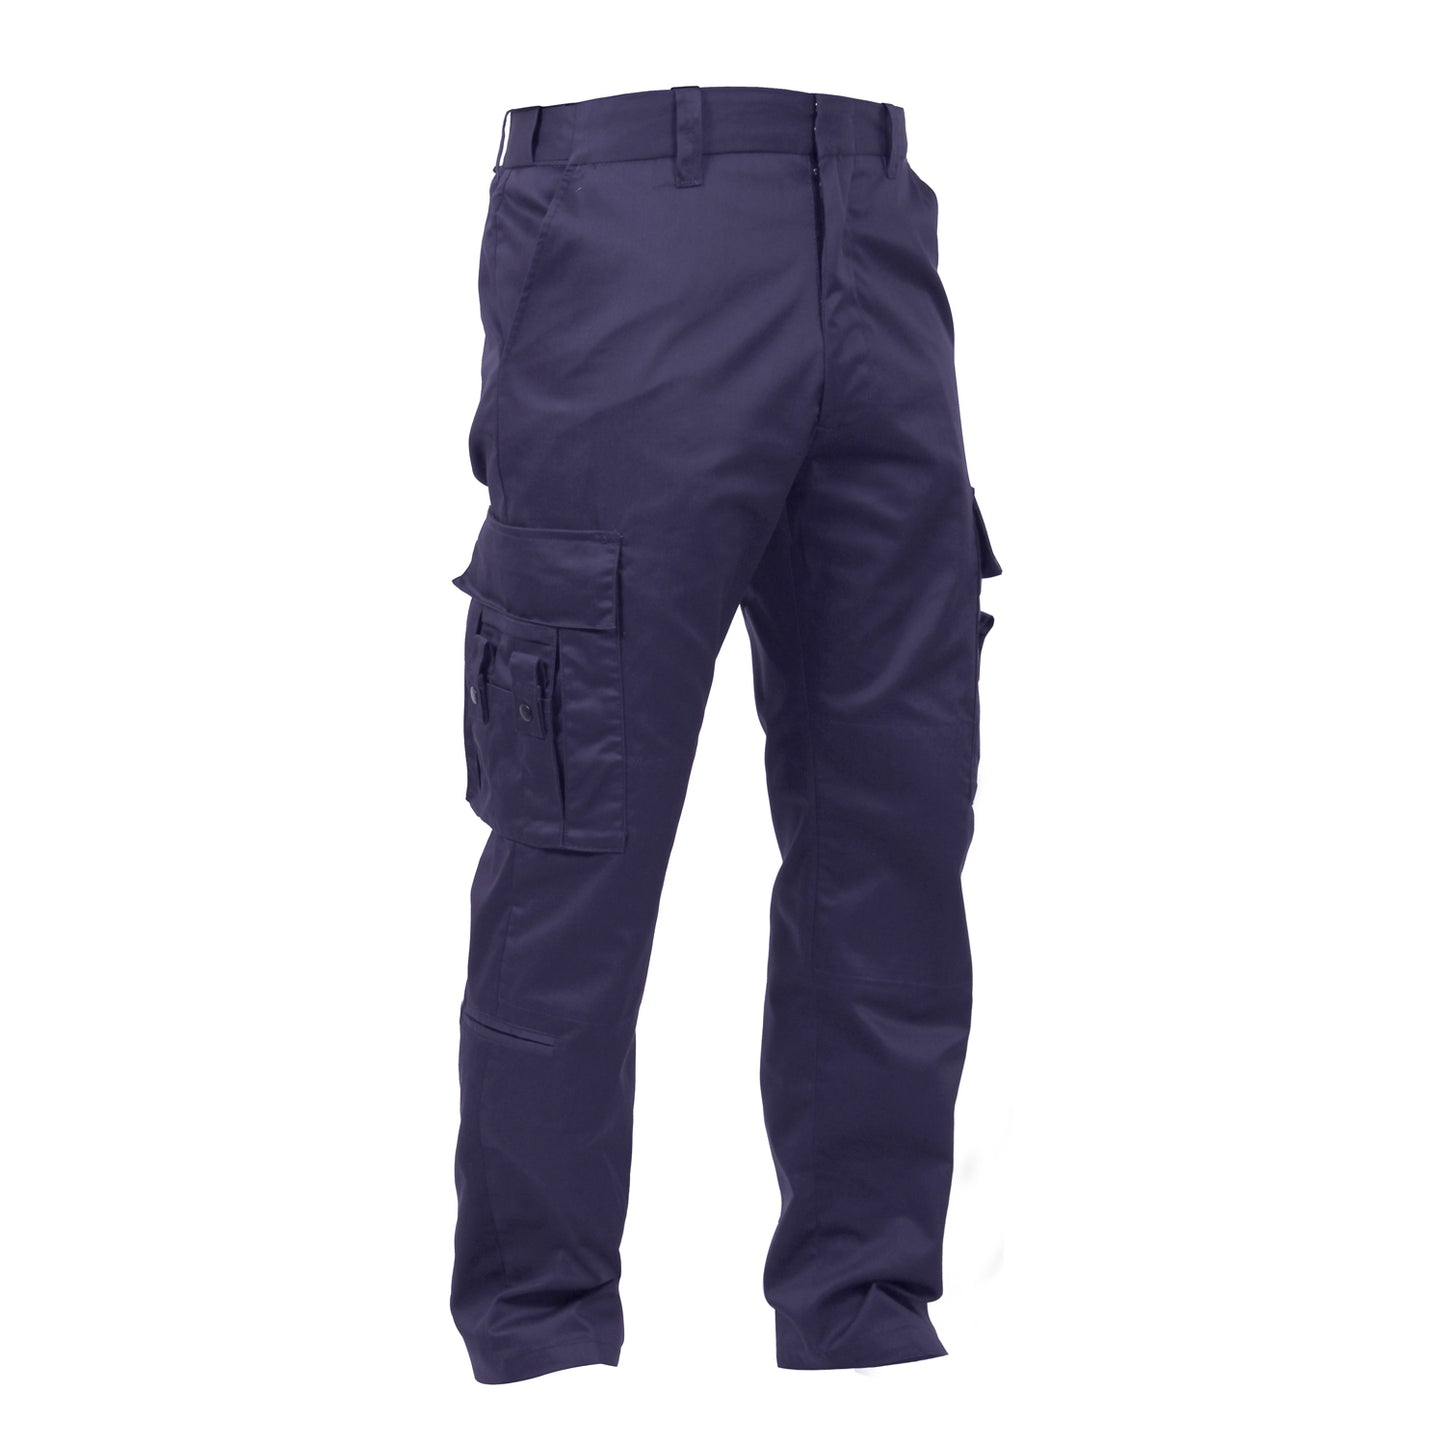 Rothco Men's Deluxe EMT EMS Pants